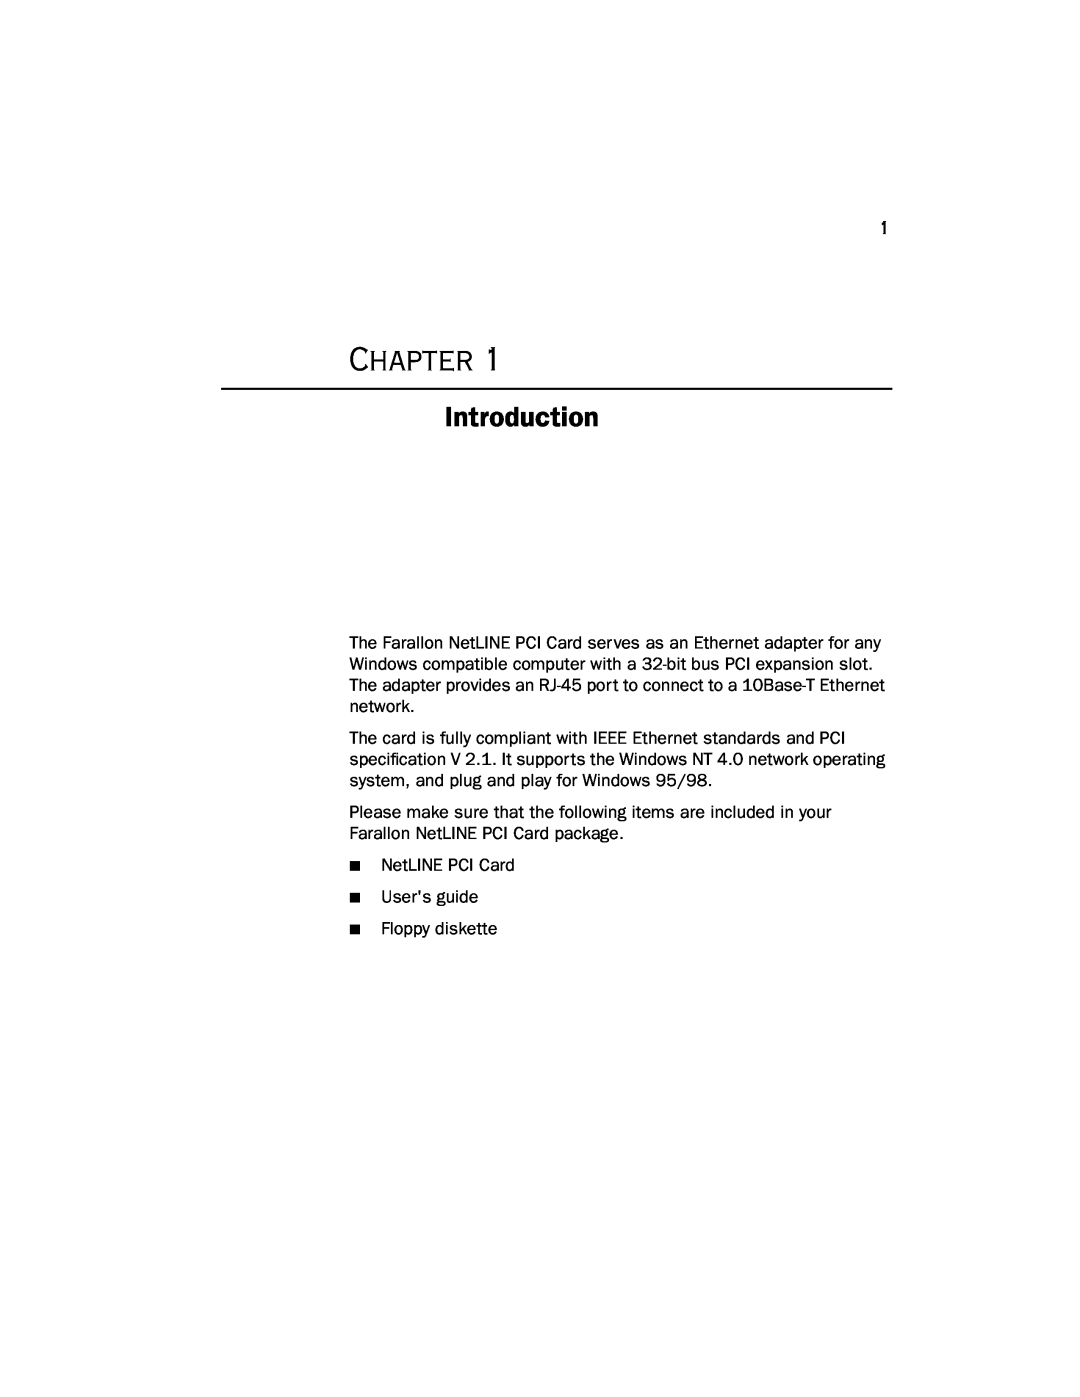 Farallon Communications PCI Card manual Introduction, Chapter 